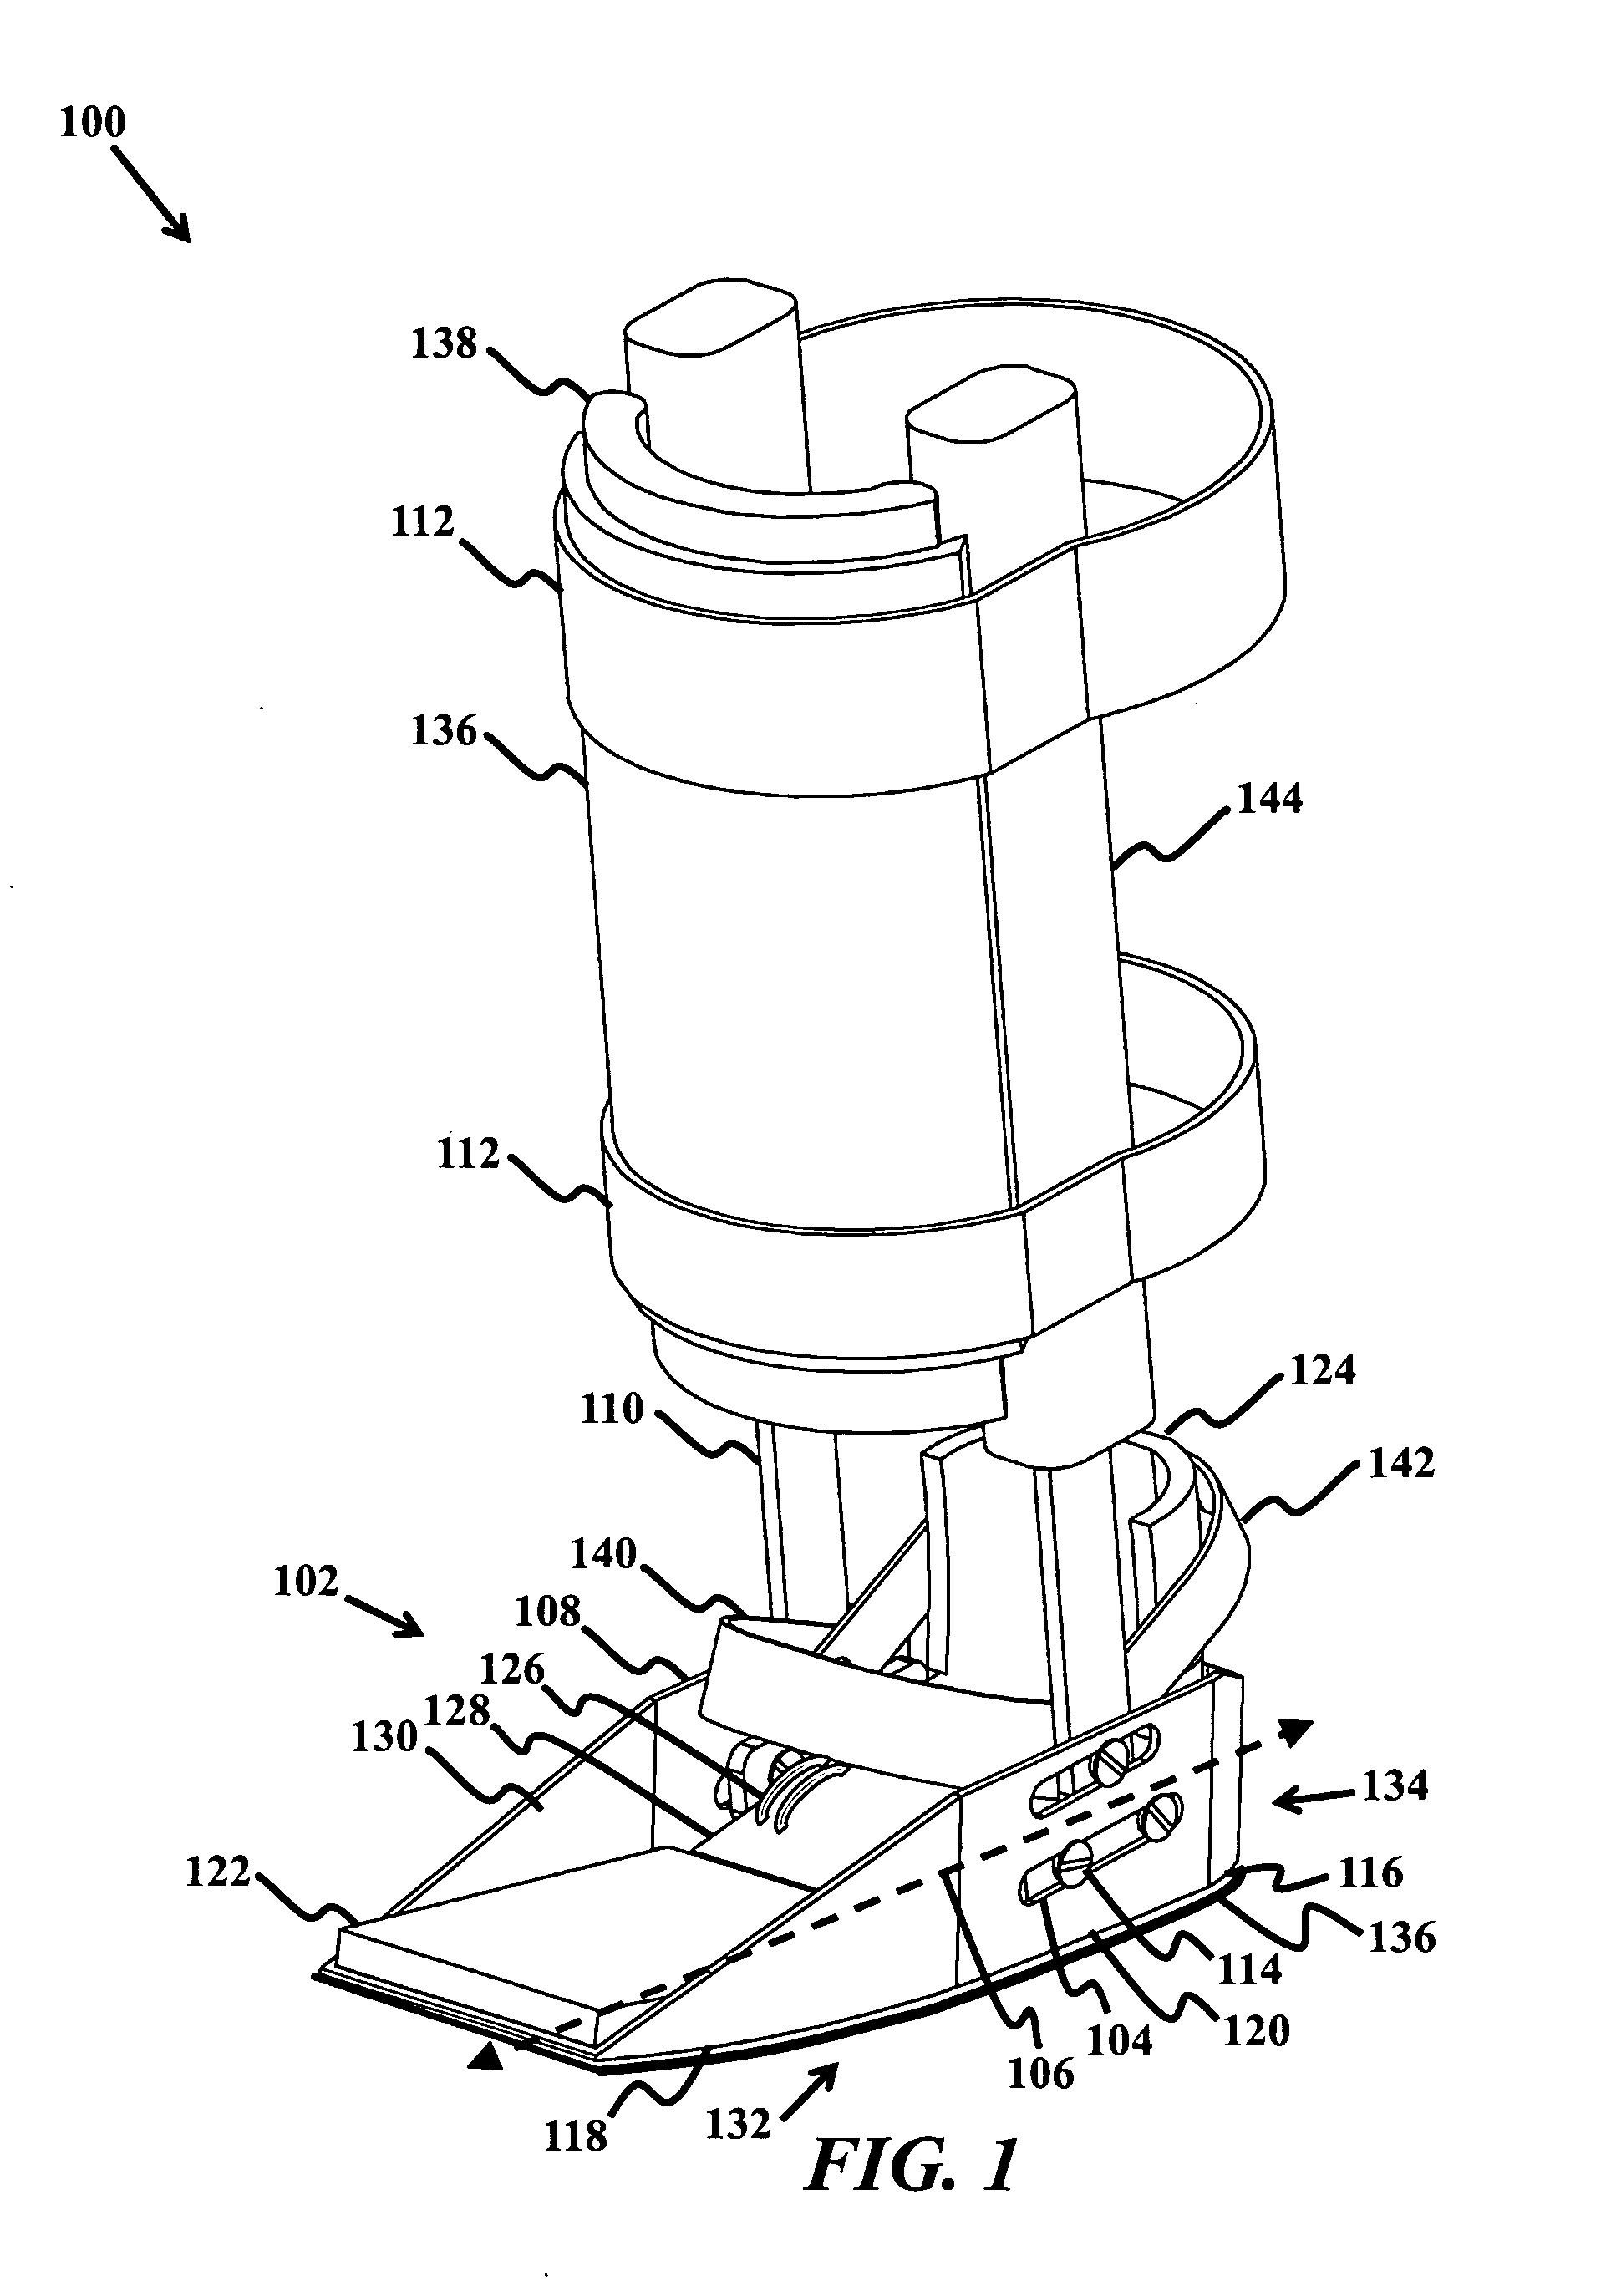 Orthotic device with sliding mechanism